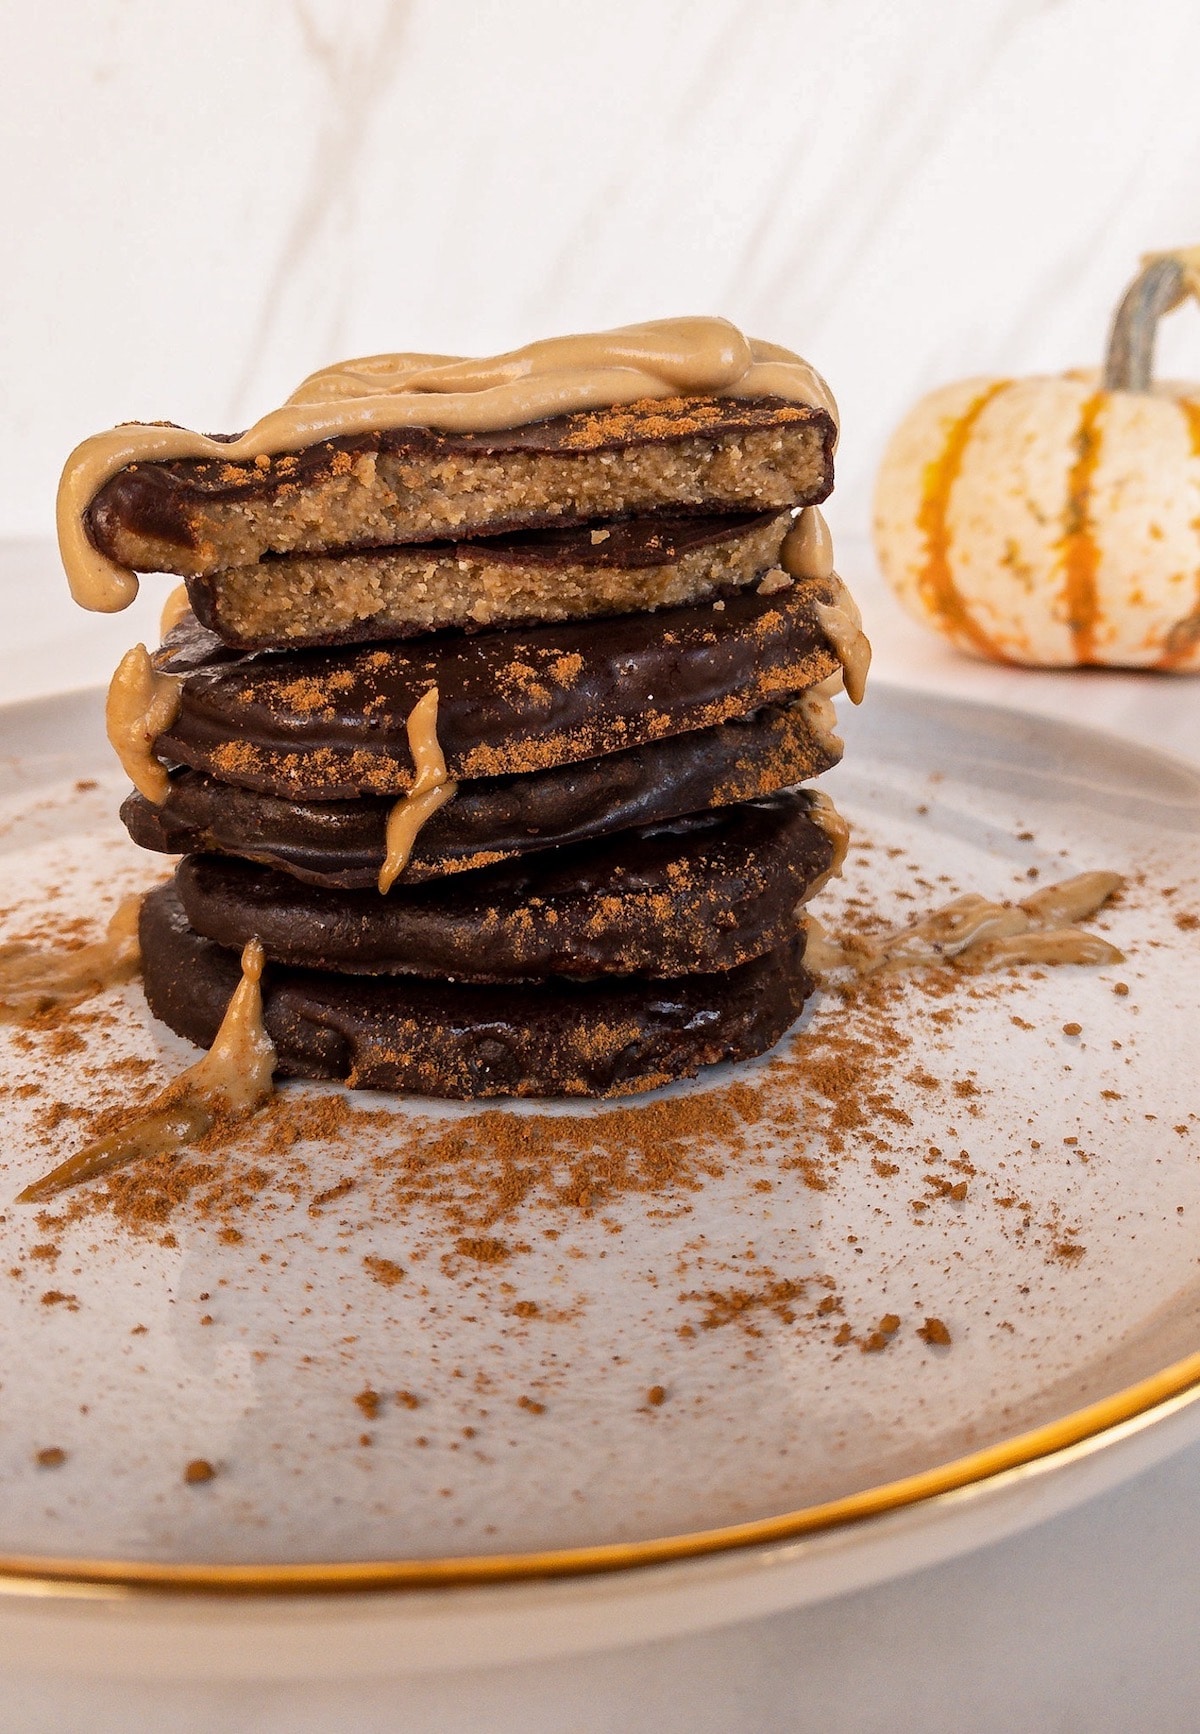 Side view of stack of chocolate pumpkins with sunbutter drizzle